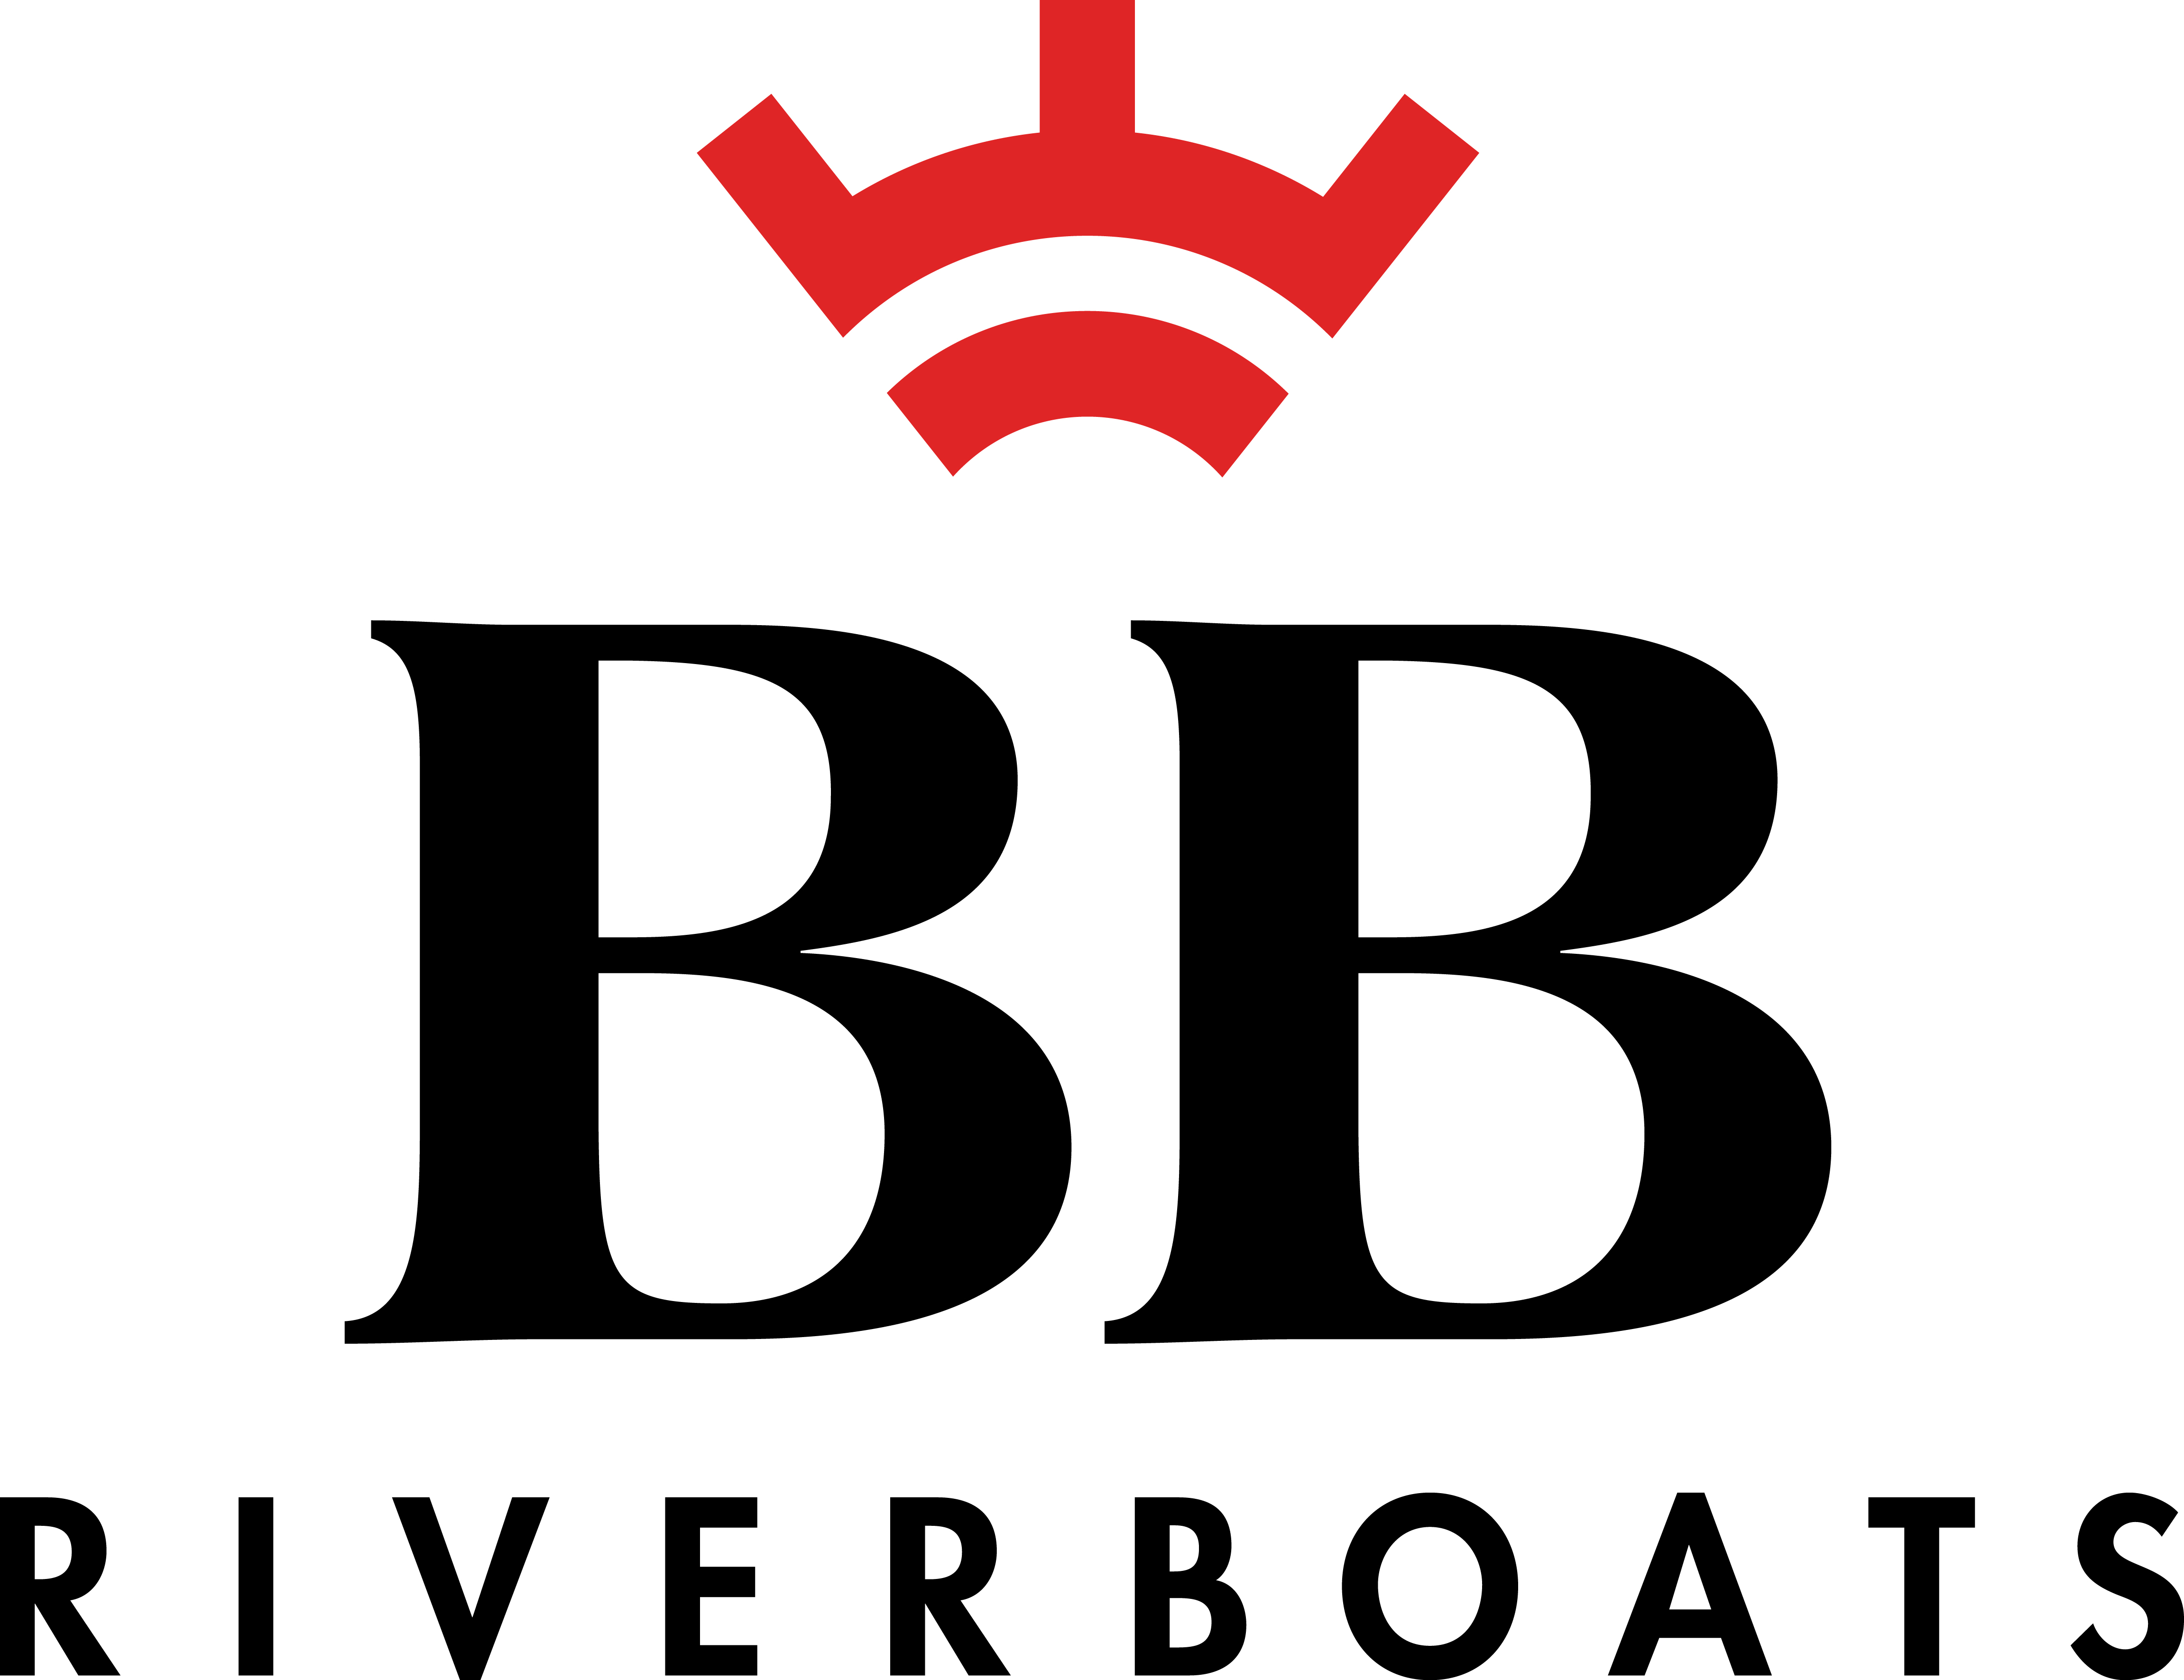 bb riverboats donation request